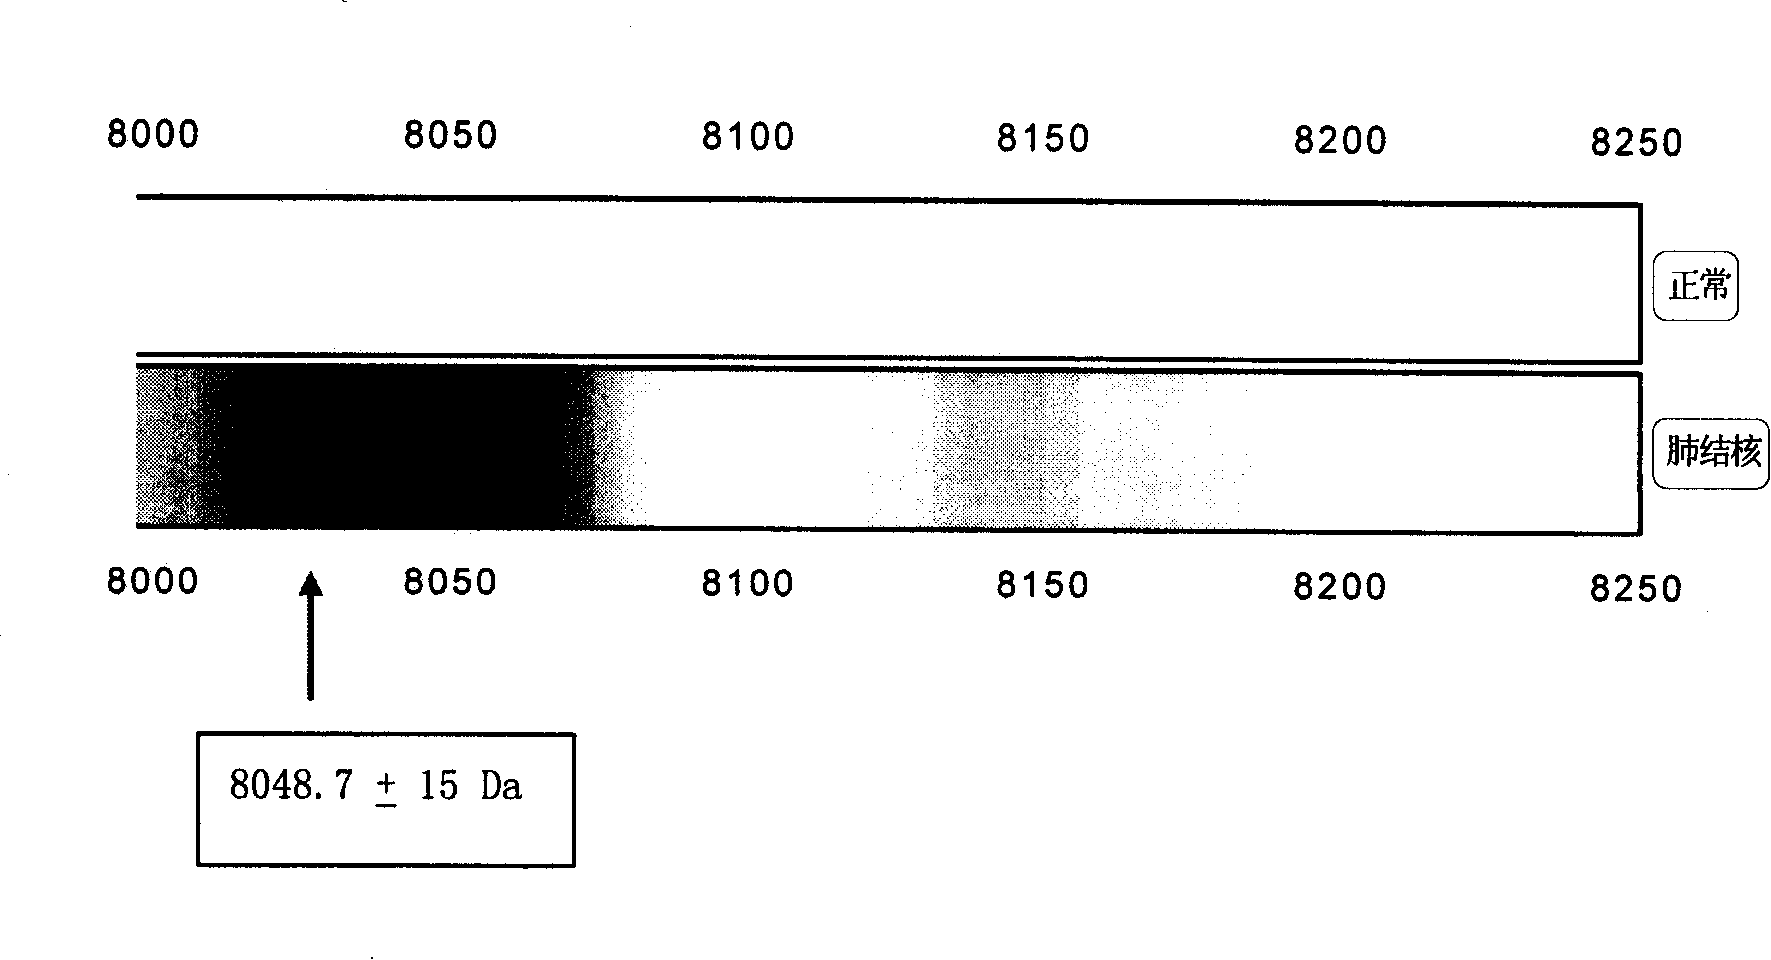 Mass spectrometry reagent kit and method for rapid tuberculosis diagnosis